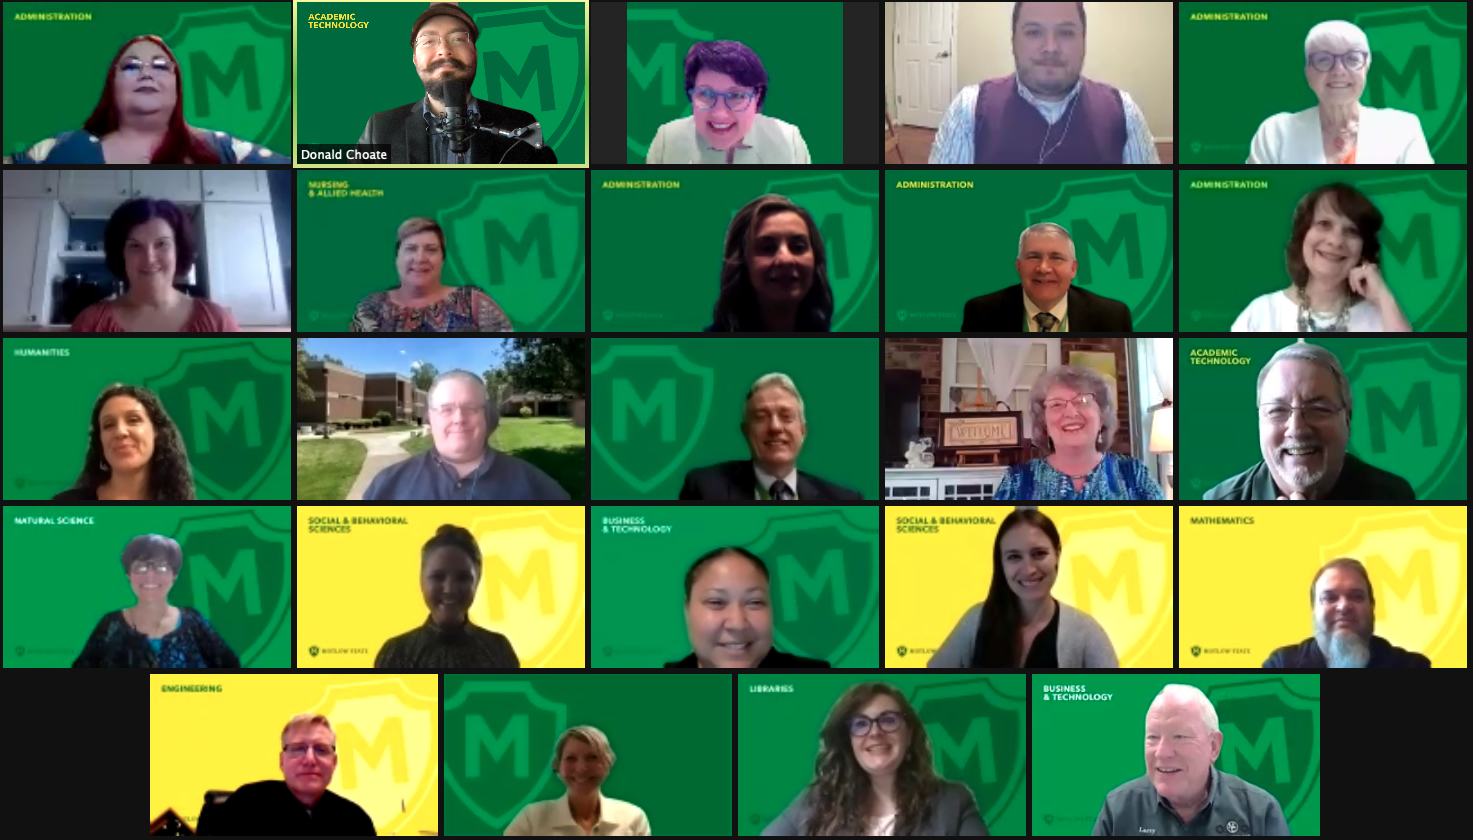 More than 300 perspective employees registered for the first virtual Motlow State Adjunct Recruiting Event. Representatives from multiple departments provided guidance and answered questions from attendees.